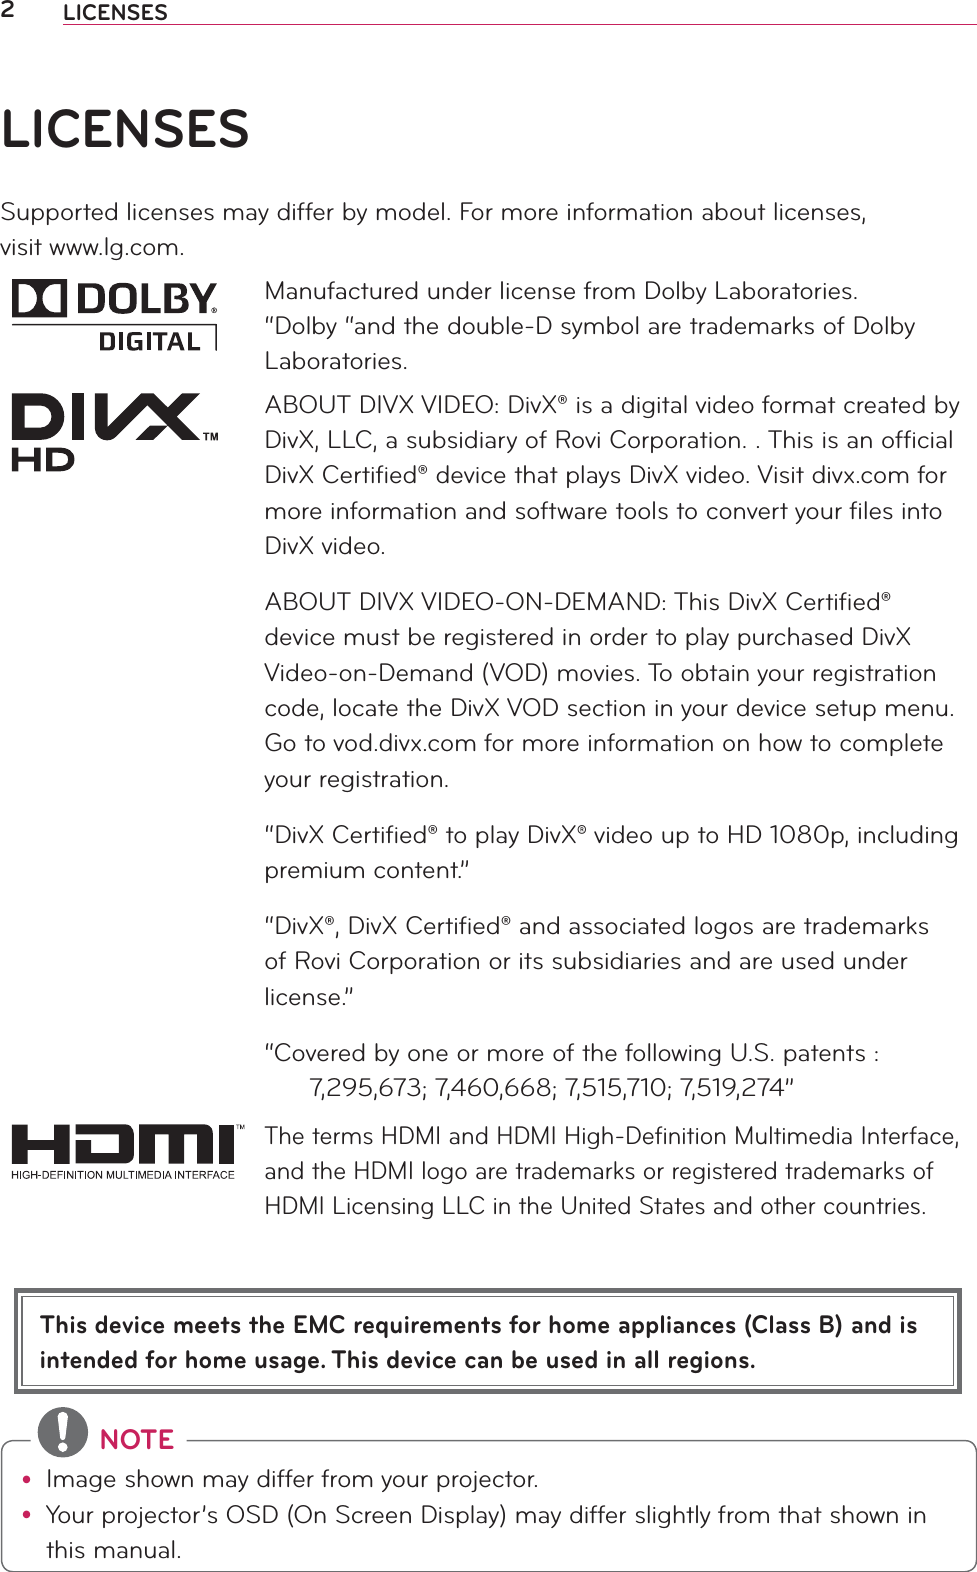 2LICENSESThis device meets the EMC requirements for home appliances (Class B) and is intended for home usage. This device can be used in all regions.LICENSESSupported licenses may differ by model. For more information about licenses,  visit www.lg.com.Manufactured under license from Dolby Laboratories. “Dolby “and the double-D symbol are trademarks of Dolby Laboratories.ABOUT DIVX VIDEO: DivX® is a digital video format created by DivX, LLC, a subsidiary of Rovi Corporation. . This is an ofﬁcial DivX Certiﬁed® device that plays DivX video. Visit divx.com for more information and software tools to convert your ﬁles into DivX video.ABOUT DIVX VIDEO-ON-DEMAND: This DivX Certiﬁed® device must be registered in order to play purchased DivX Video-on-Demand (VOD) movies. To obtain your registration code, locate the DivX VOD section in your device setup menu. Go to vod.divx.com for more information on how to complete your registration. “DivX Certiﬁed® to play DivX® video up to HD 1080p, including premium content.”“DivX®, DivX Certiﬁed® and associated logos are trademarks of Rovi Corporation or its subsidiaries and are used under license.”“Covered by one or more of the following U.S. patents :        7,295,673; 7,460,668; 7,515,710; 7,519,274”The terms HDMI and HDMI High-Deﬁnition Multimedia Interface, and the HDMI logo are trademarks or registered trademarks of HDMI Licensing LLC in the United States and other countries. NOTEy Image shown may differ from your projector.y Your projector’s OSD (On Screen Display) may differ slightly from that shown in this manual.